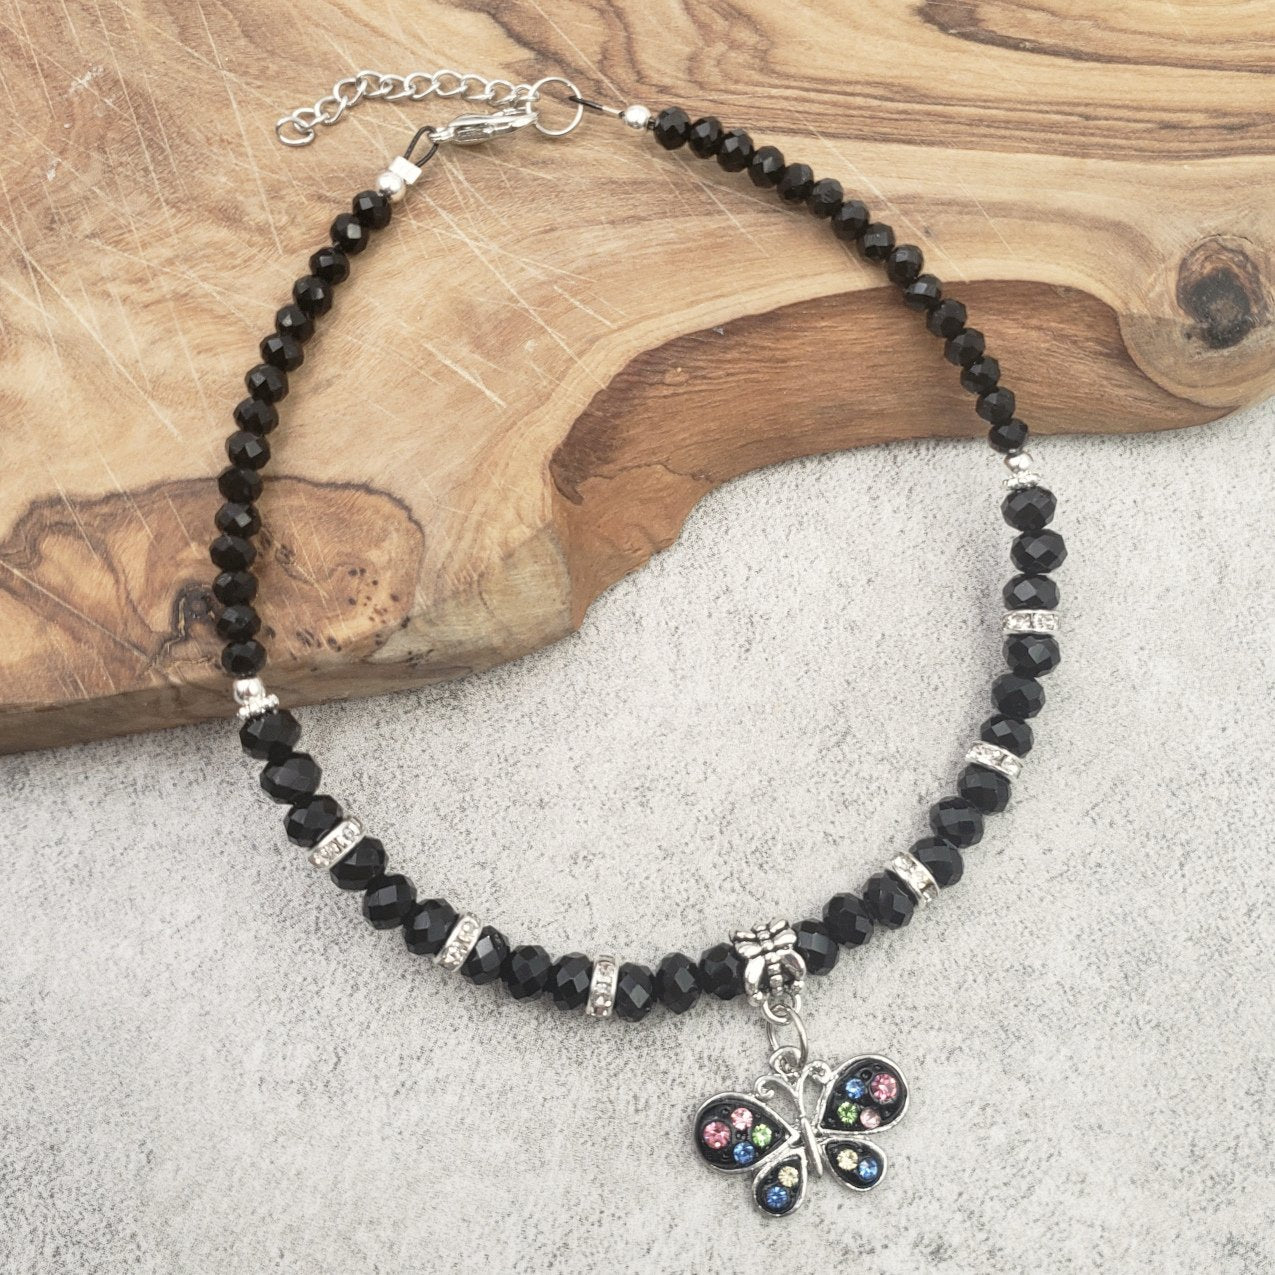 BESHEEK Butterfly BLACK RAINBOW Faceted Crystal Rhinestone Glass Artisan Beaded Anklet with Extension | Handmade Hypoallergenic Beach Gala Wedding Style Jewelry